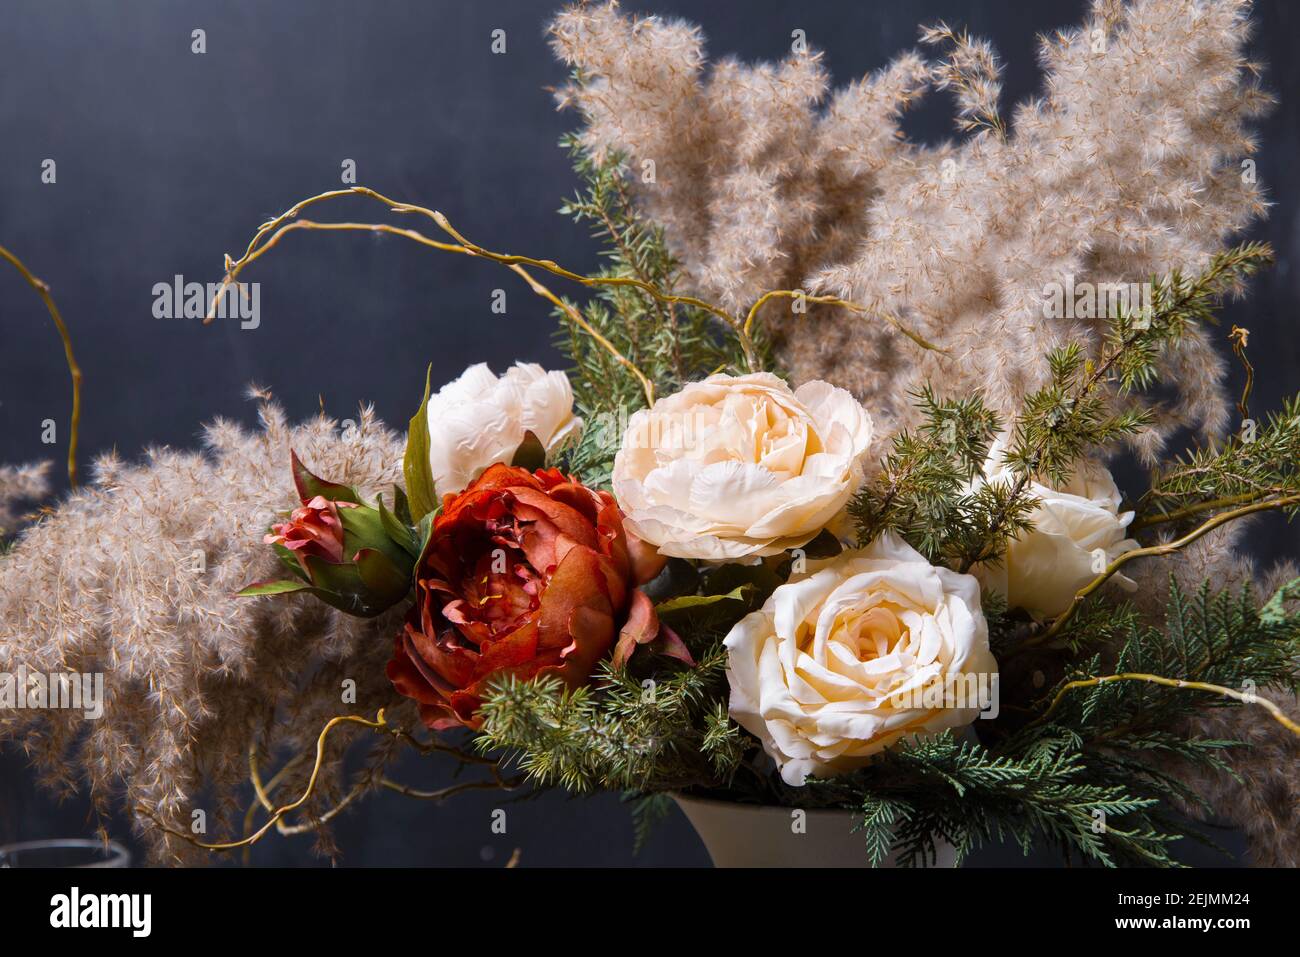 Close up photo of beautiful floral composition over dark background. Stock Photo